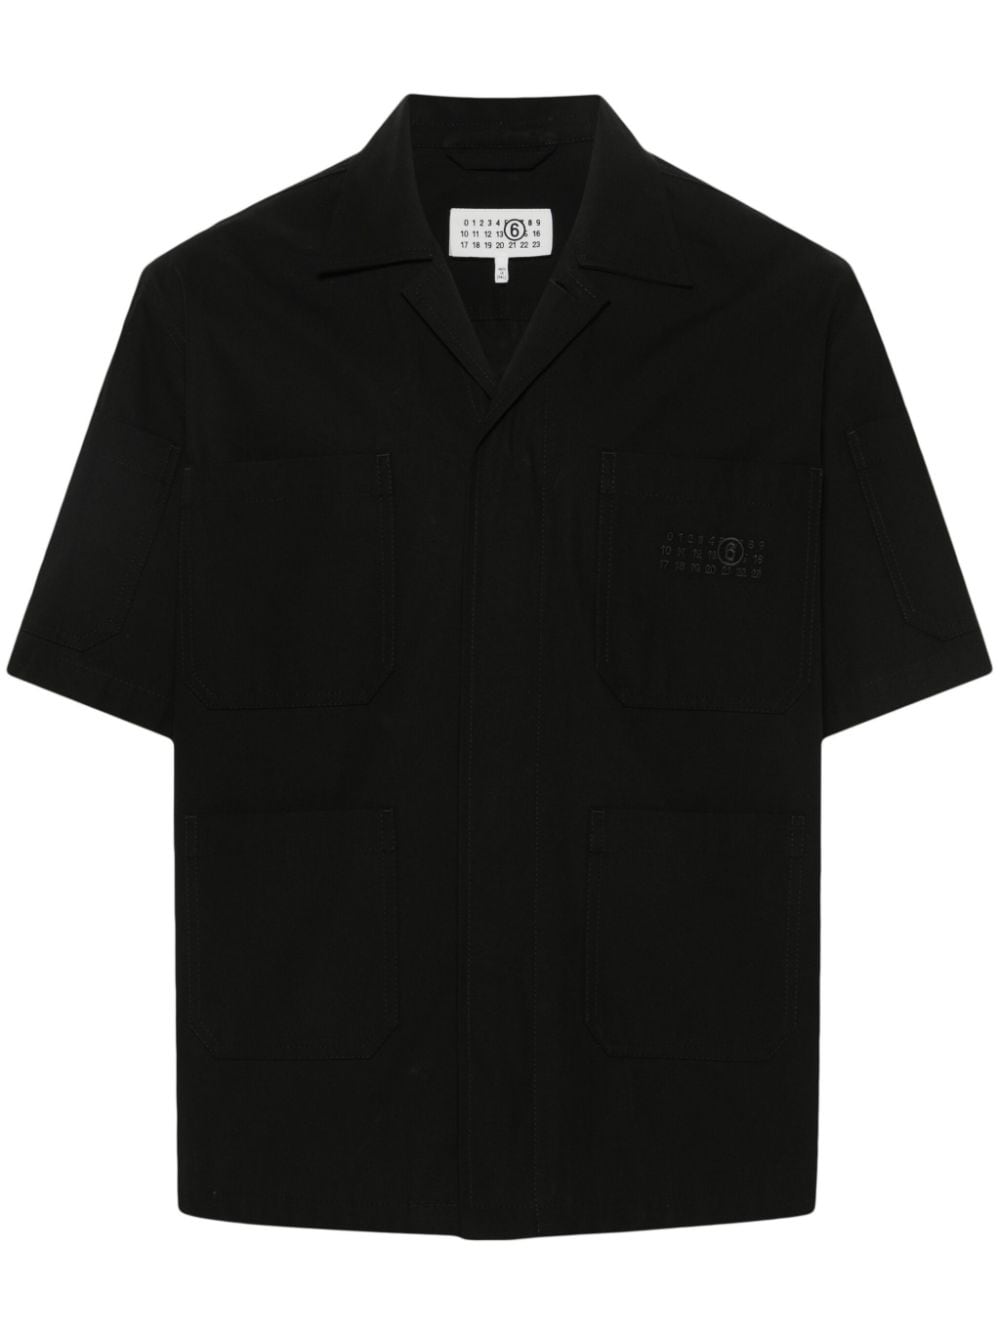 numbers-embroidered cotton shirt